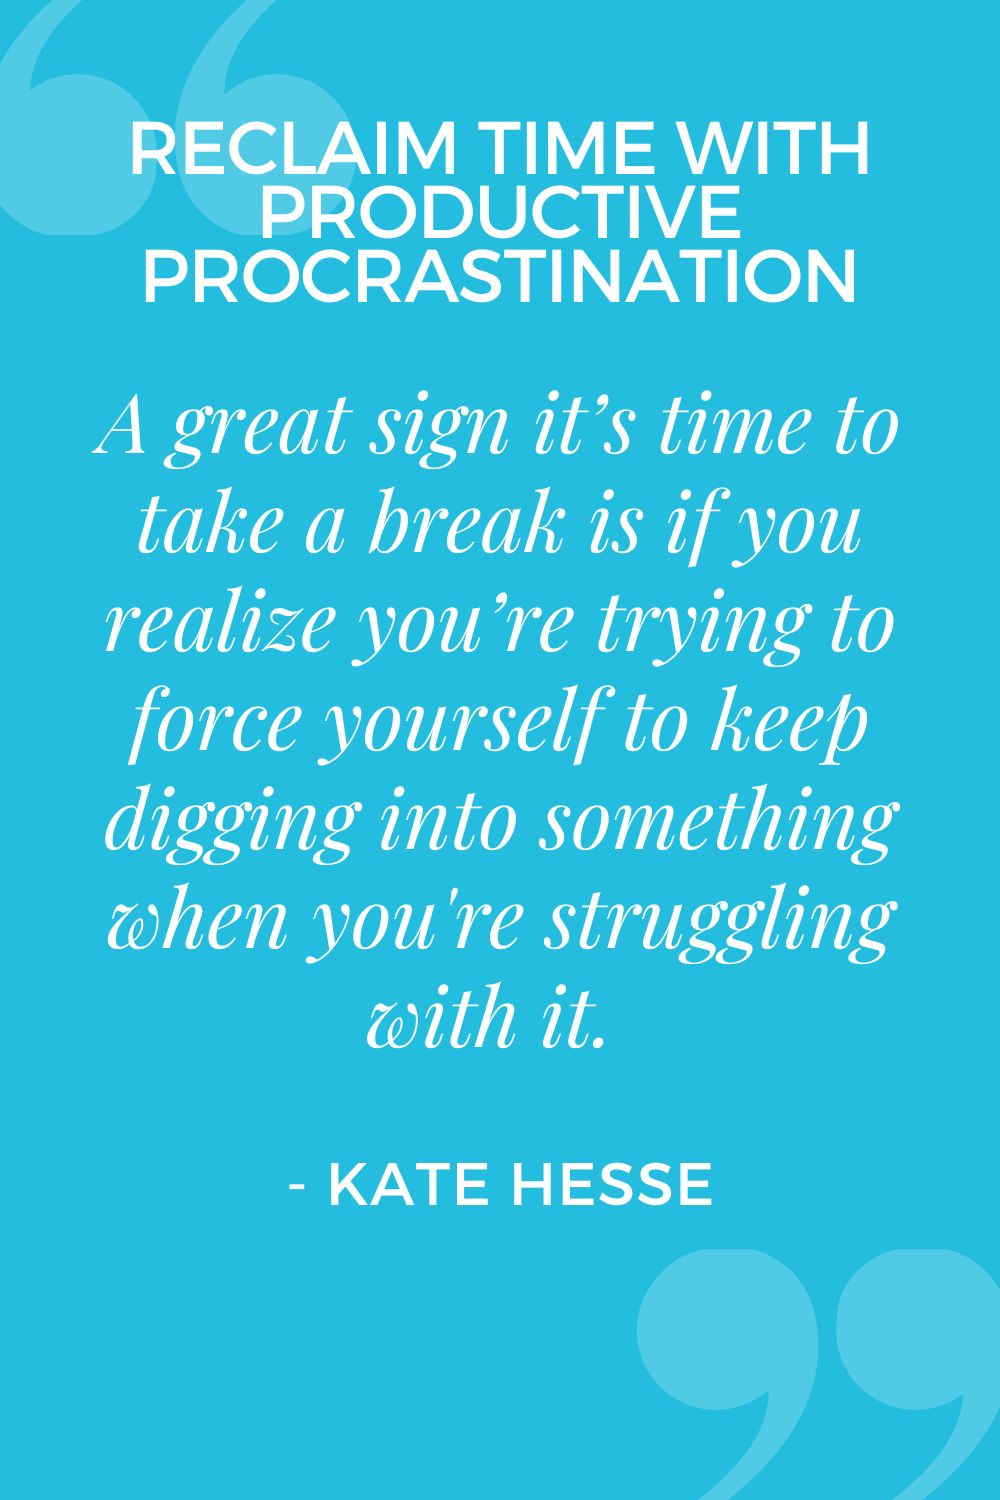 A great sign it's time to take a break is if you realize you're trying to force yourself to keep digging into something when you're struggling with it.